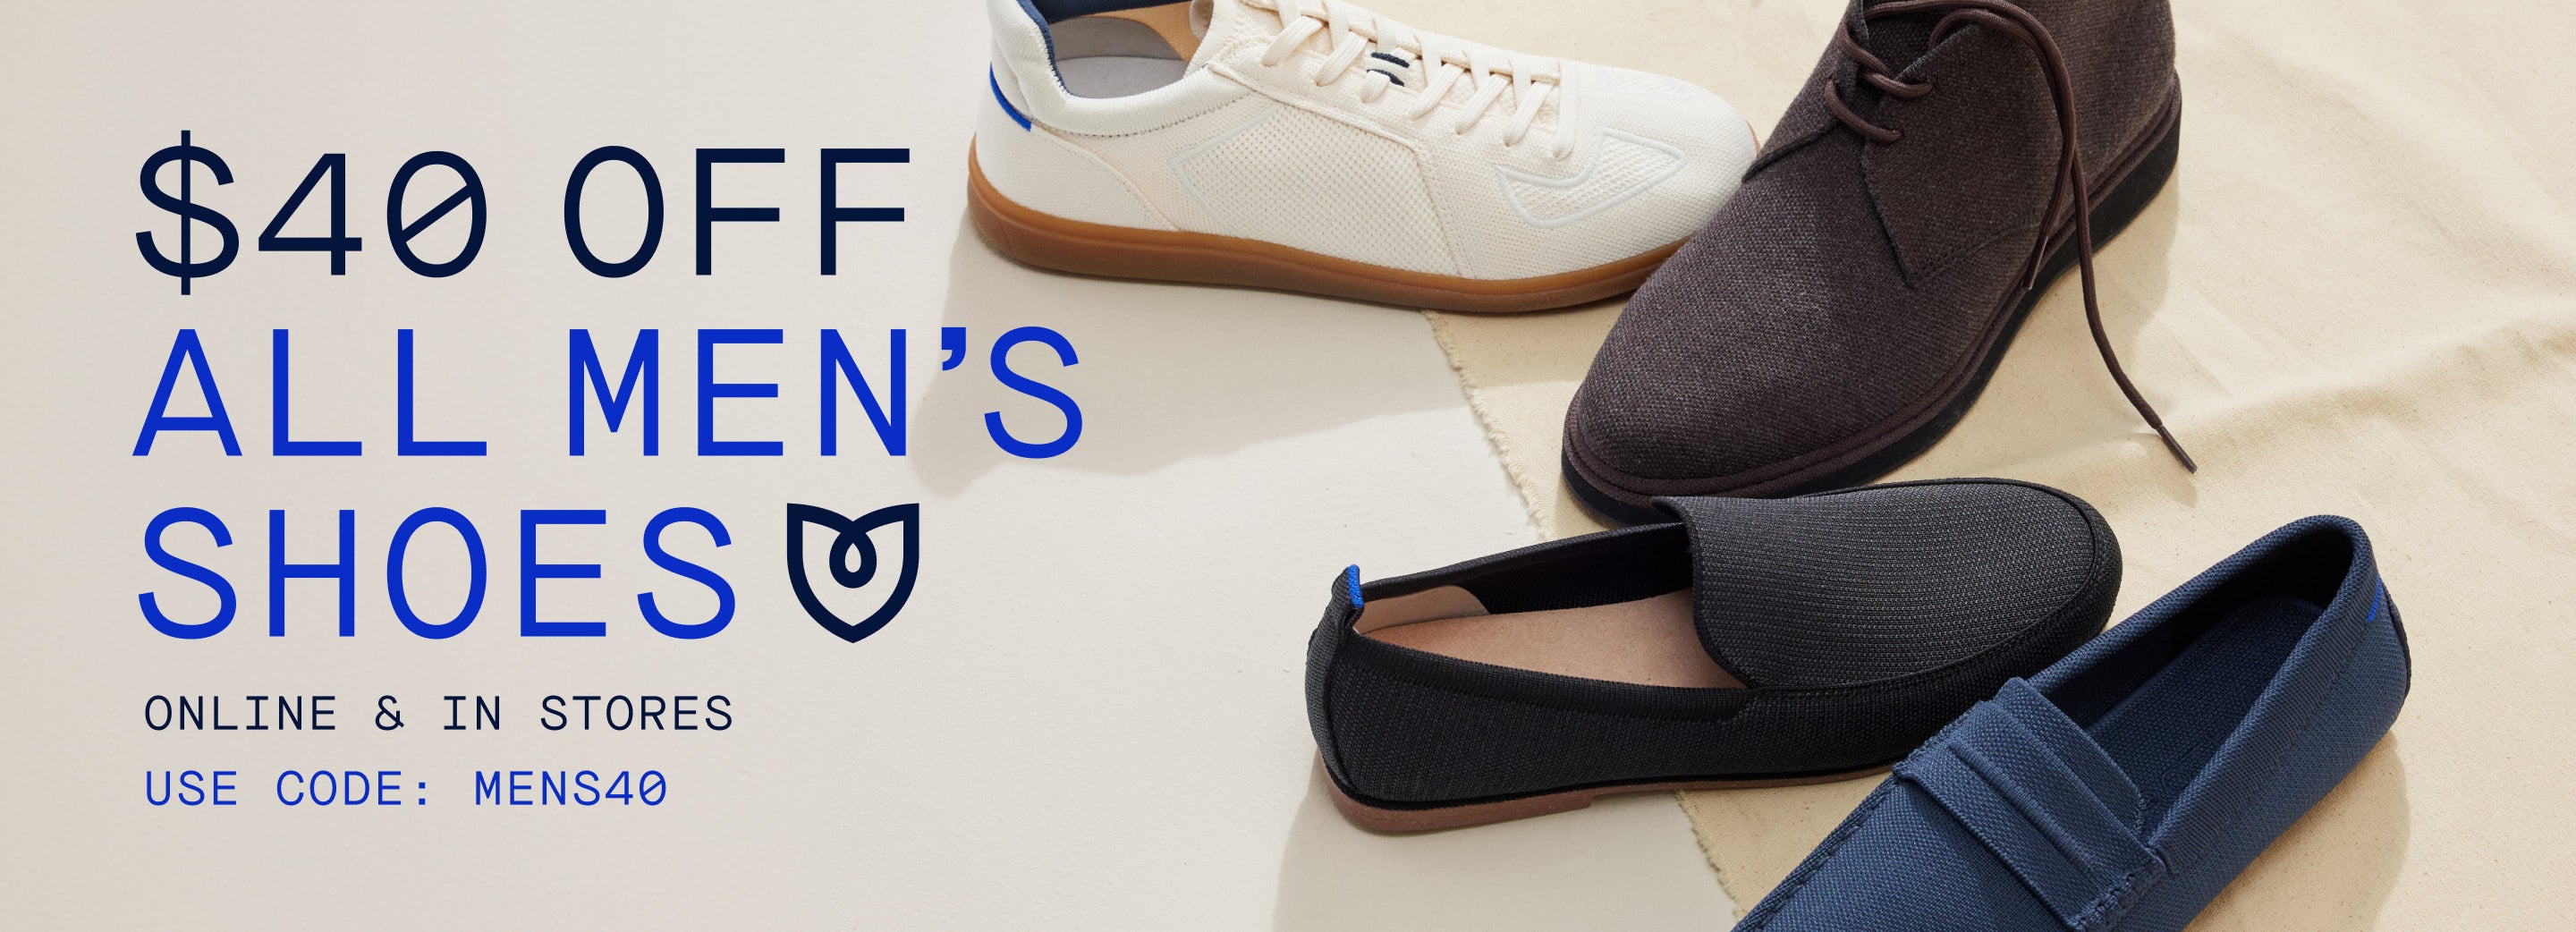 $40 OFF ALL MEN'S SHOES ONLINE & IN STORES USE CODE: MENS40